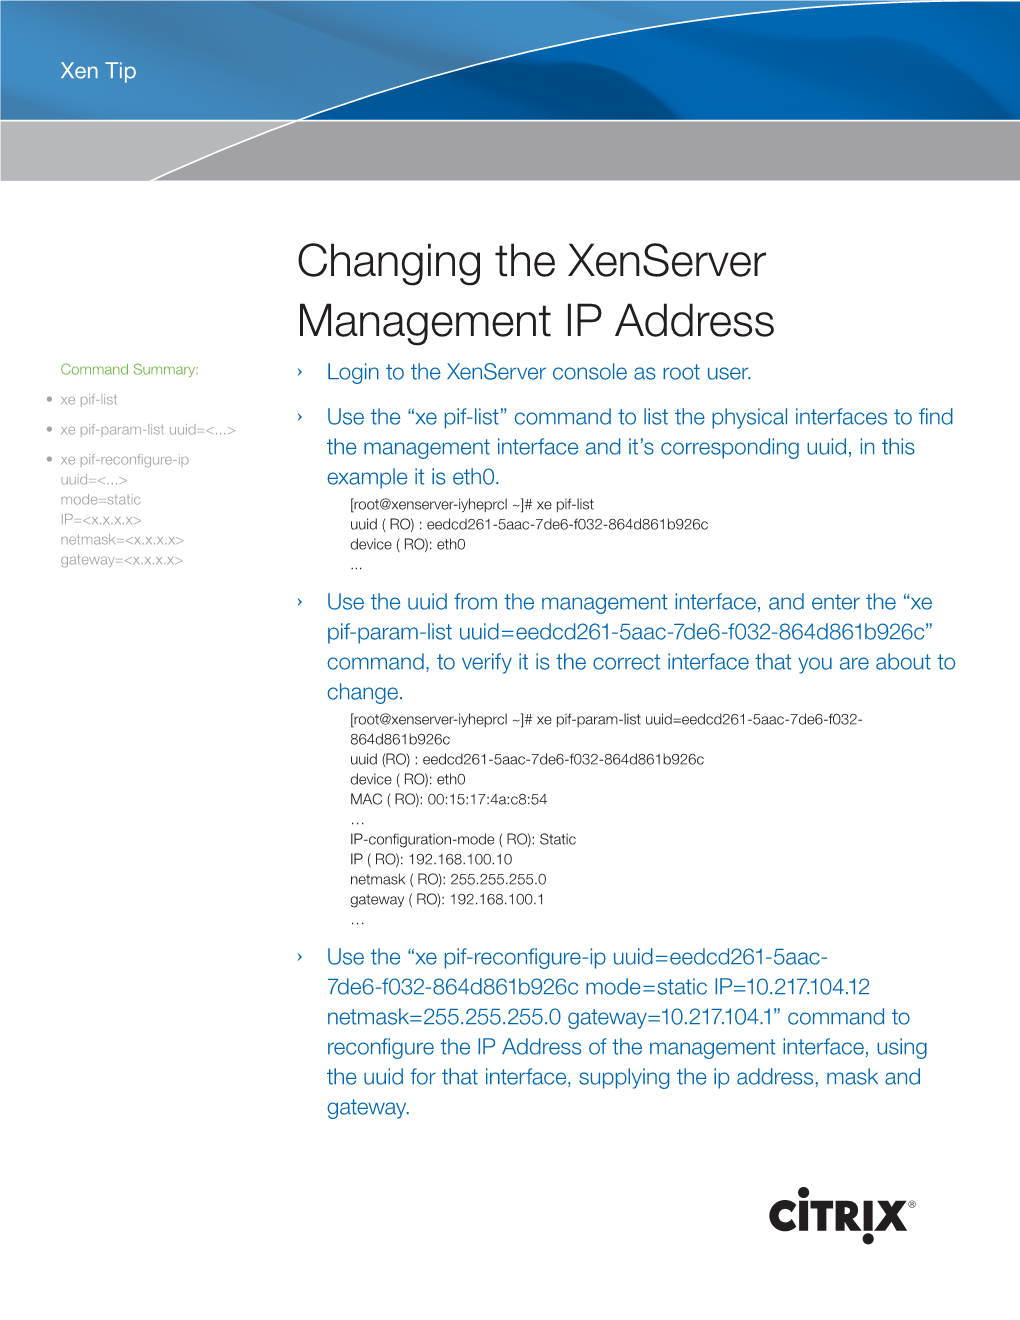 Changing the Xenserver Management IP Address